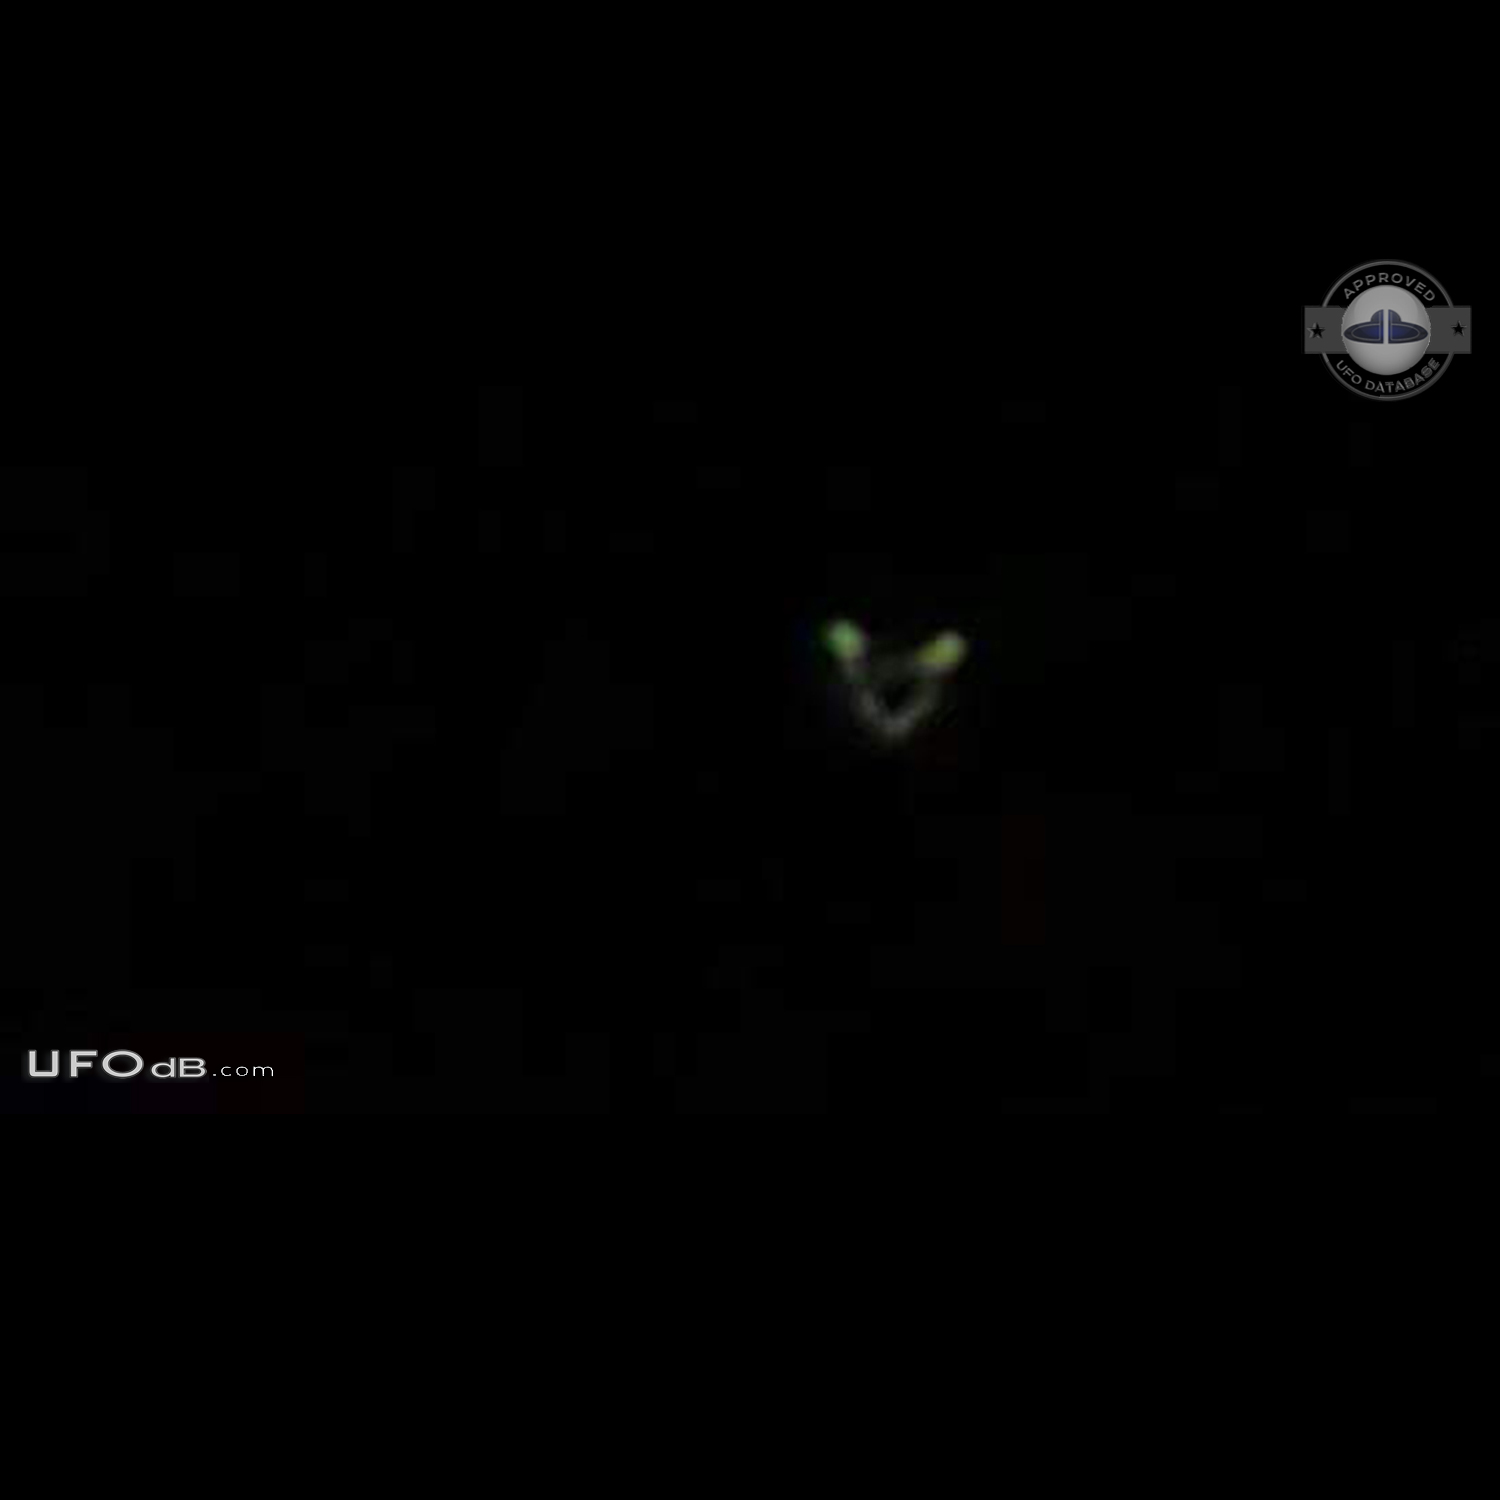 Circular UFO with 2 glowing green lights seen in Huddersfield UK 2011 UFO Picture #688-1